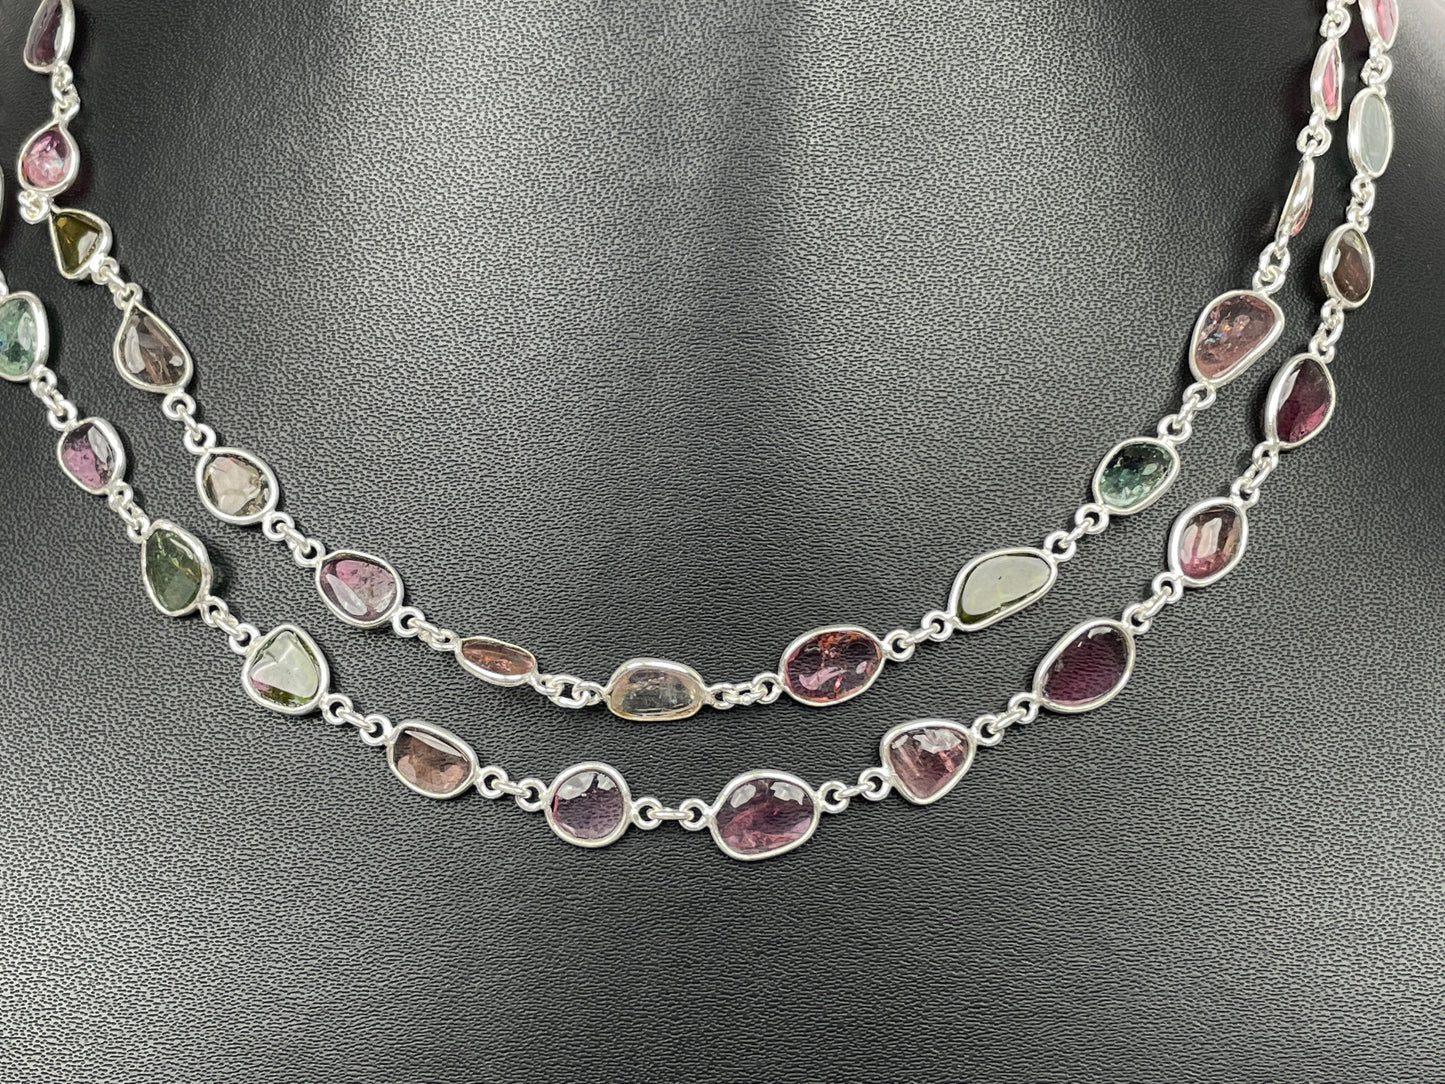 Multi Tourmaline Rose Cut Necklace Tourmaline Silver Necklace Multi Tourmaline Chain Handmade Jewelry Christmas Gift for her/She/Mom 36 INCH